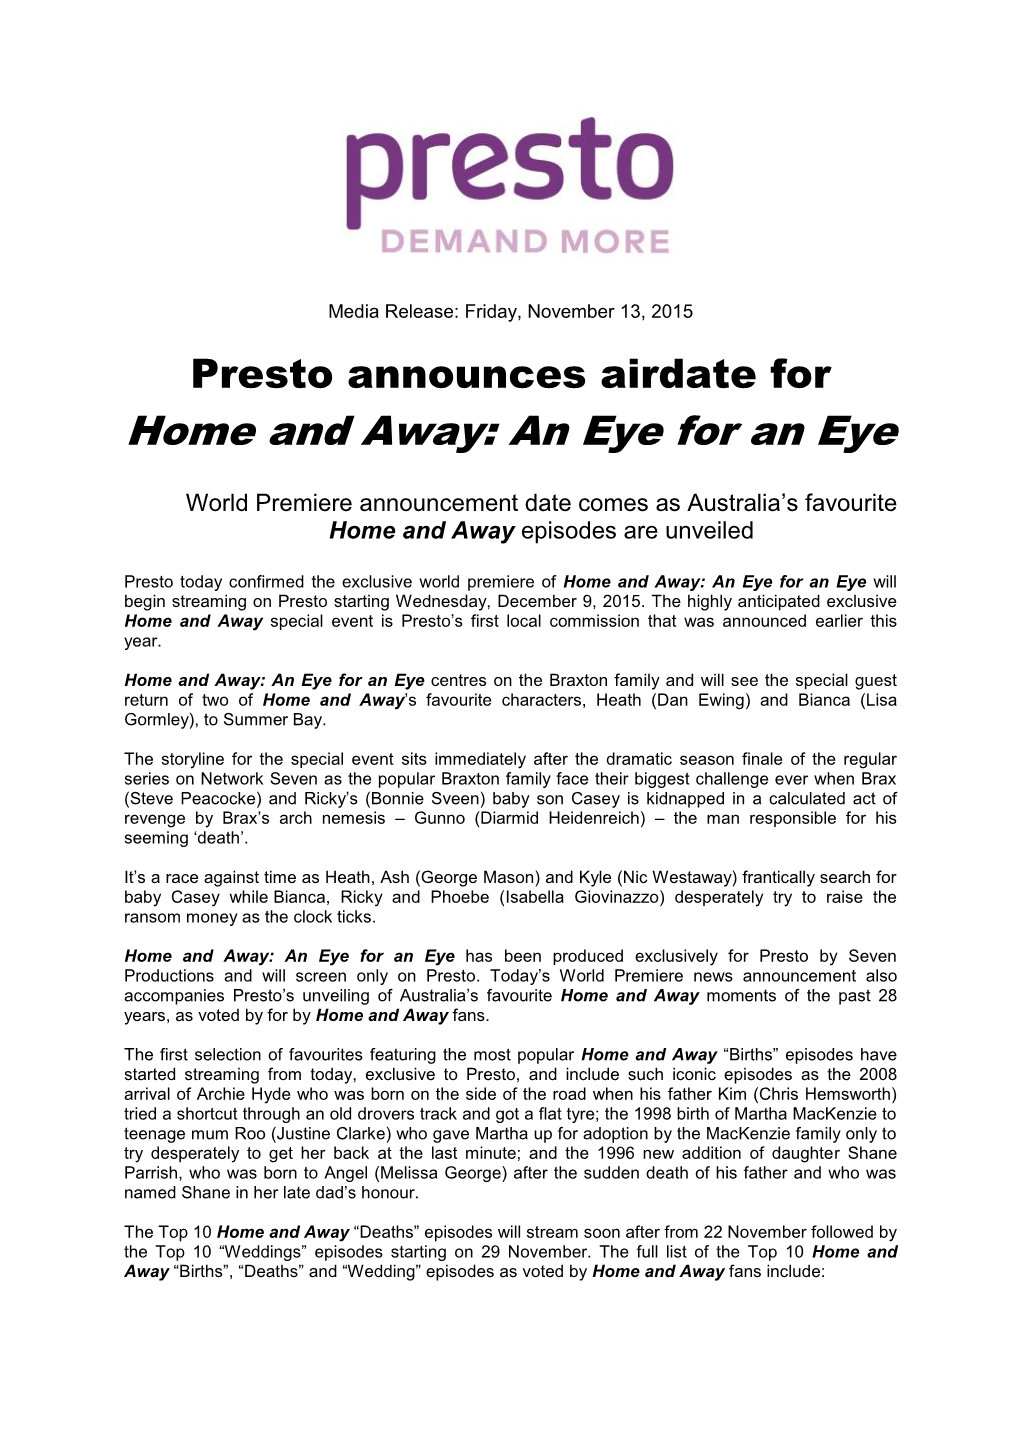 Presto Announces Airdate for Home and Away: an Eye for an Eye